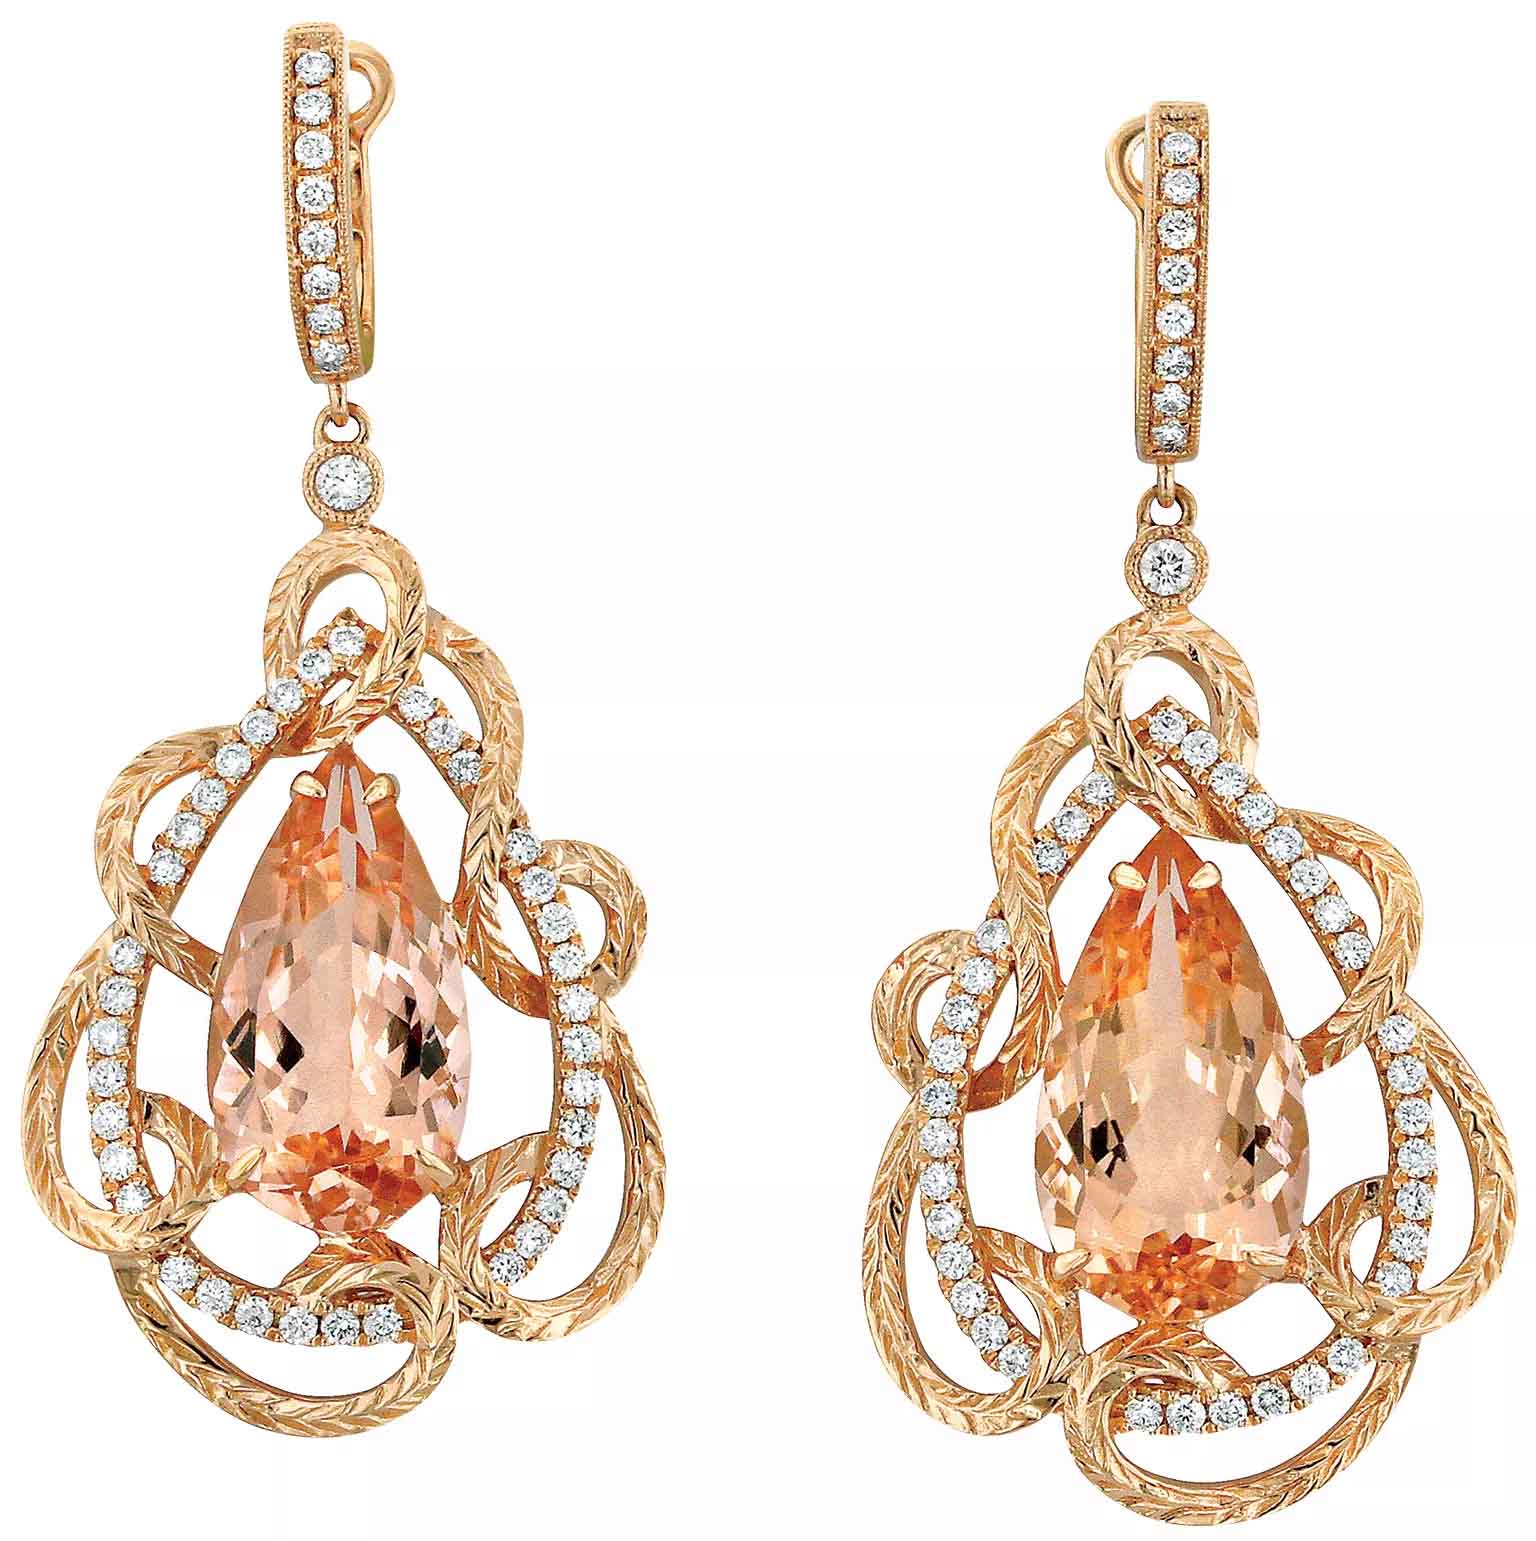 Earrings in 18k rose gold with 10.5 cts. t.w. morganite